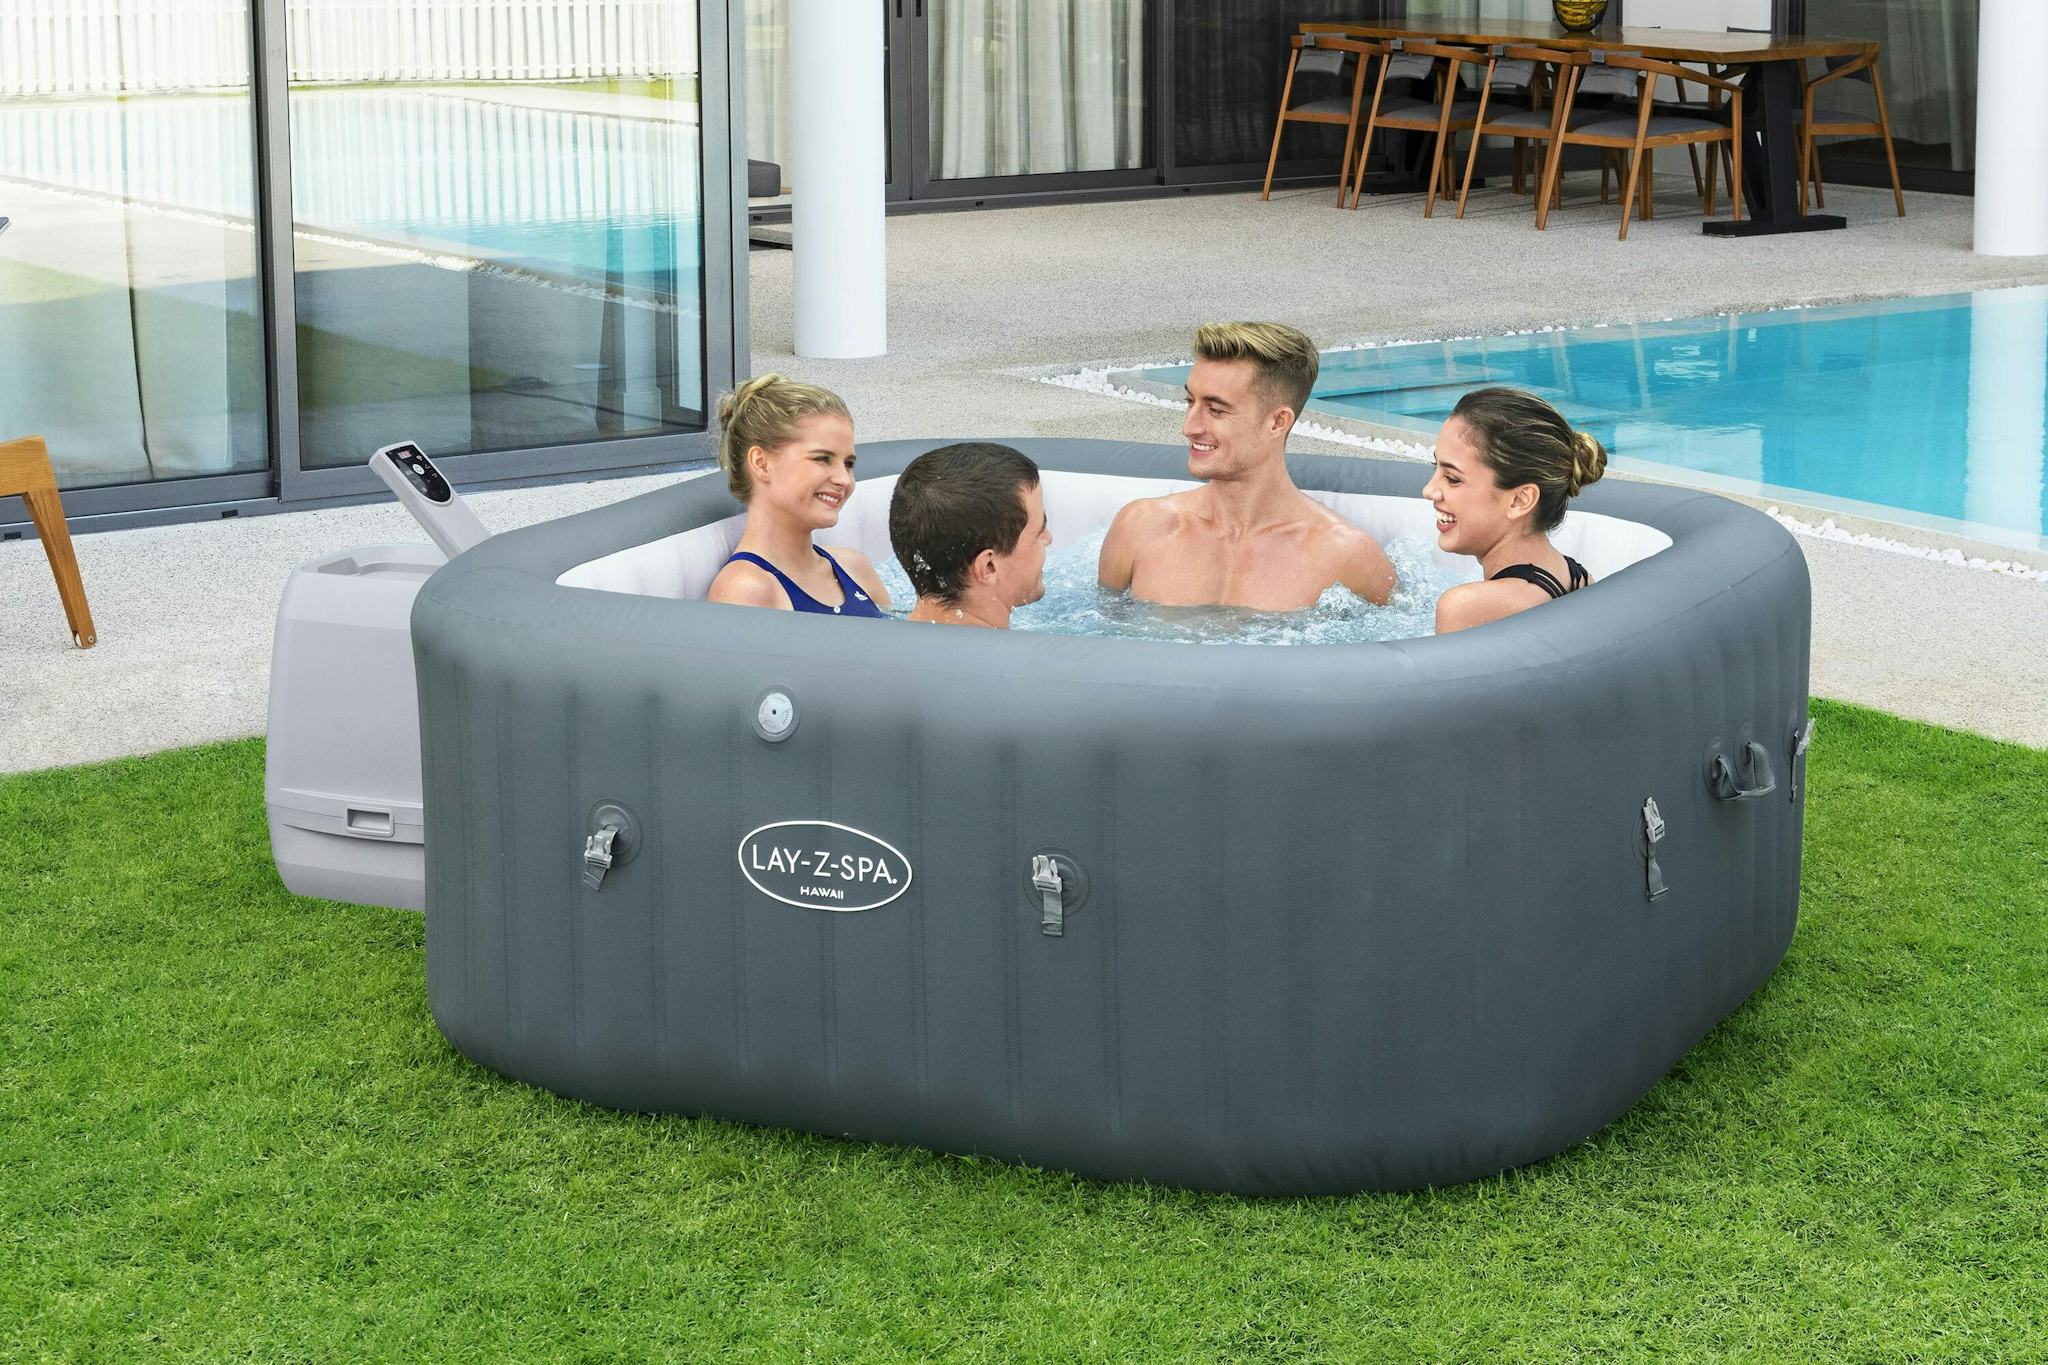 Spas Gonflables Spa gonflable carré Lay-Z-Spa Hawaii Hydrojet Pro™ 4 - 6 personnes Bestway 12